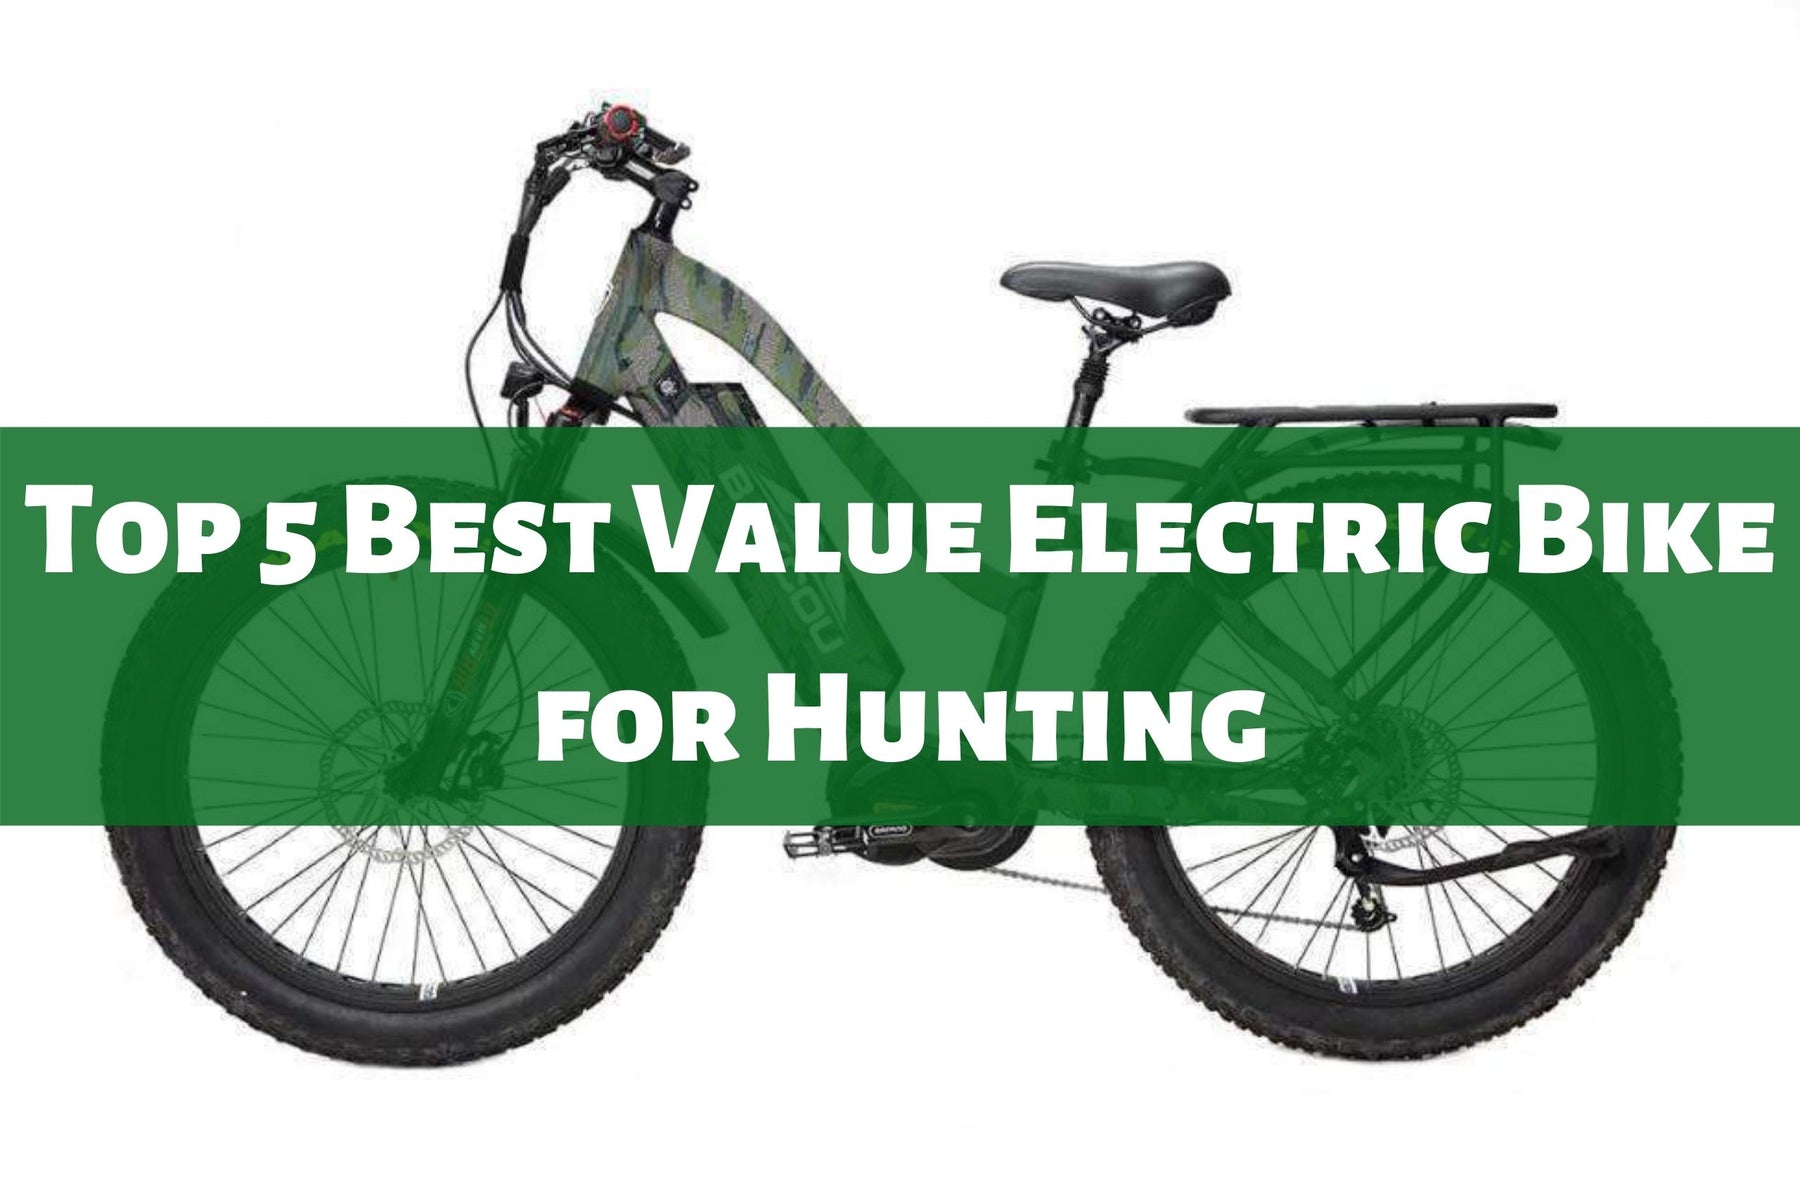 Top 5 Best Value Electric Bike for Hunting - eBike Generation